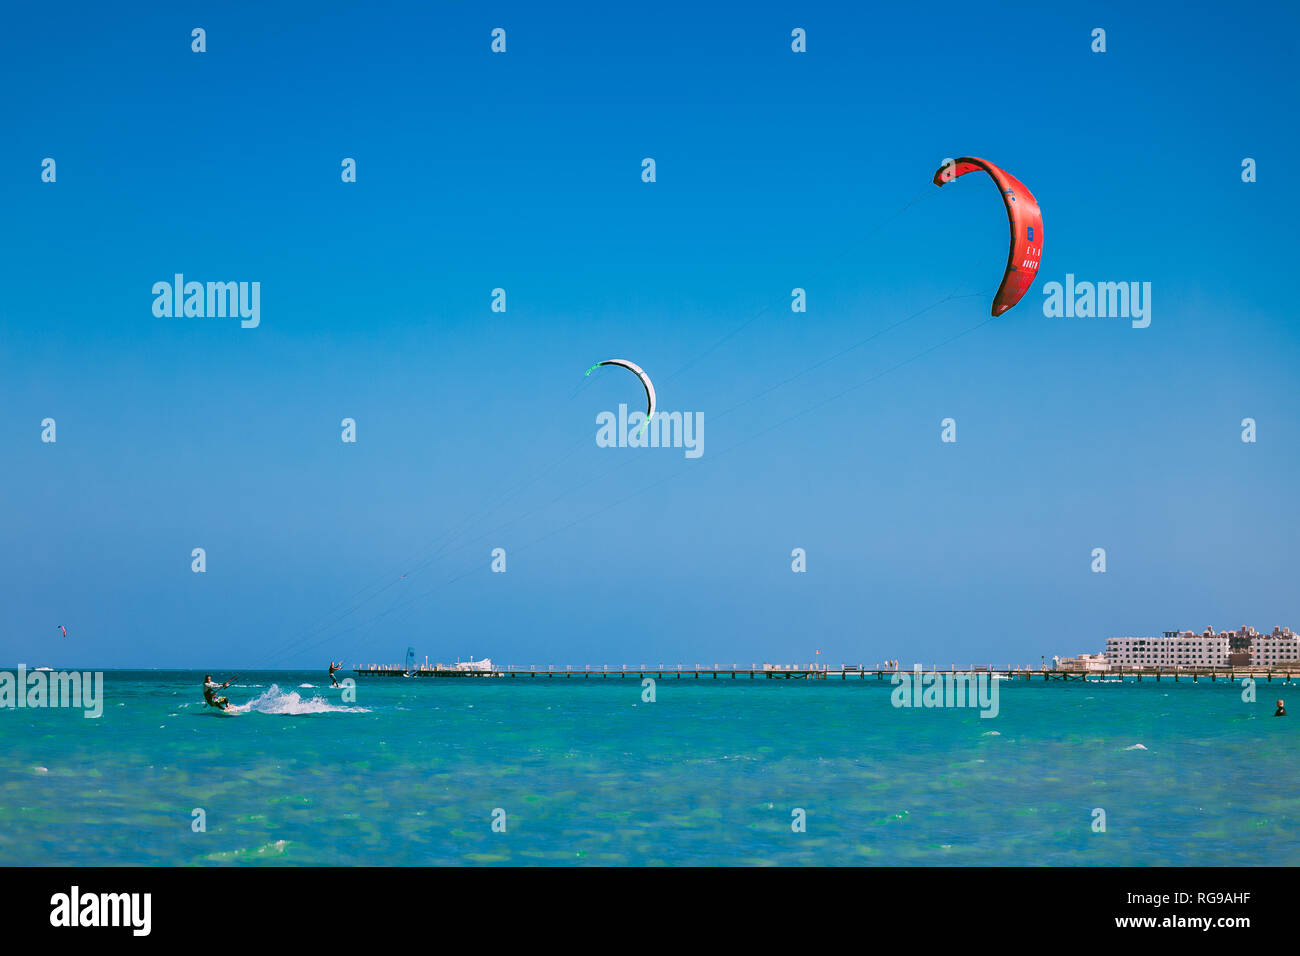 Egypt, Hurghada - 30 November, 2017: The red and white kites in the blue sky over the Red sea surface. The professional kitesurfers gliding on the wav Stock Photo